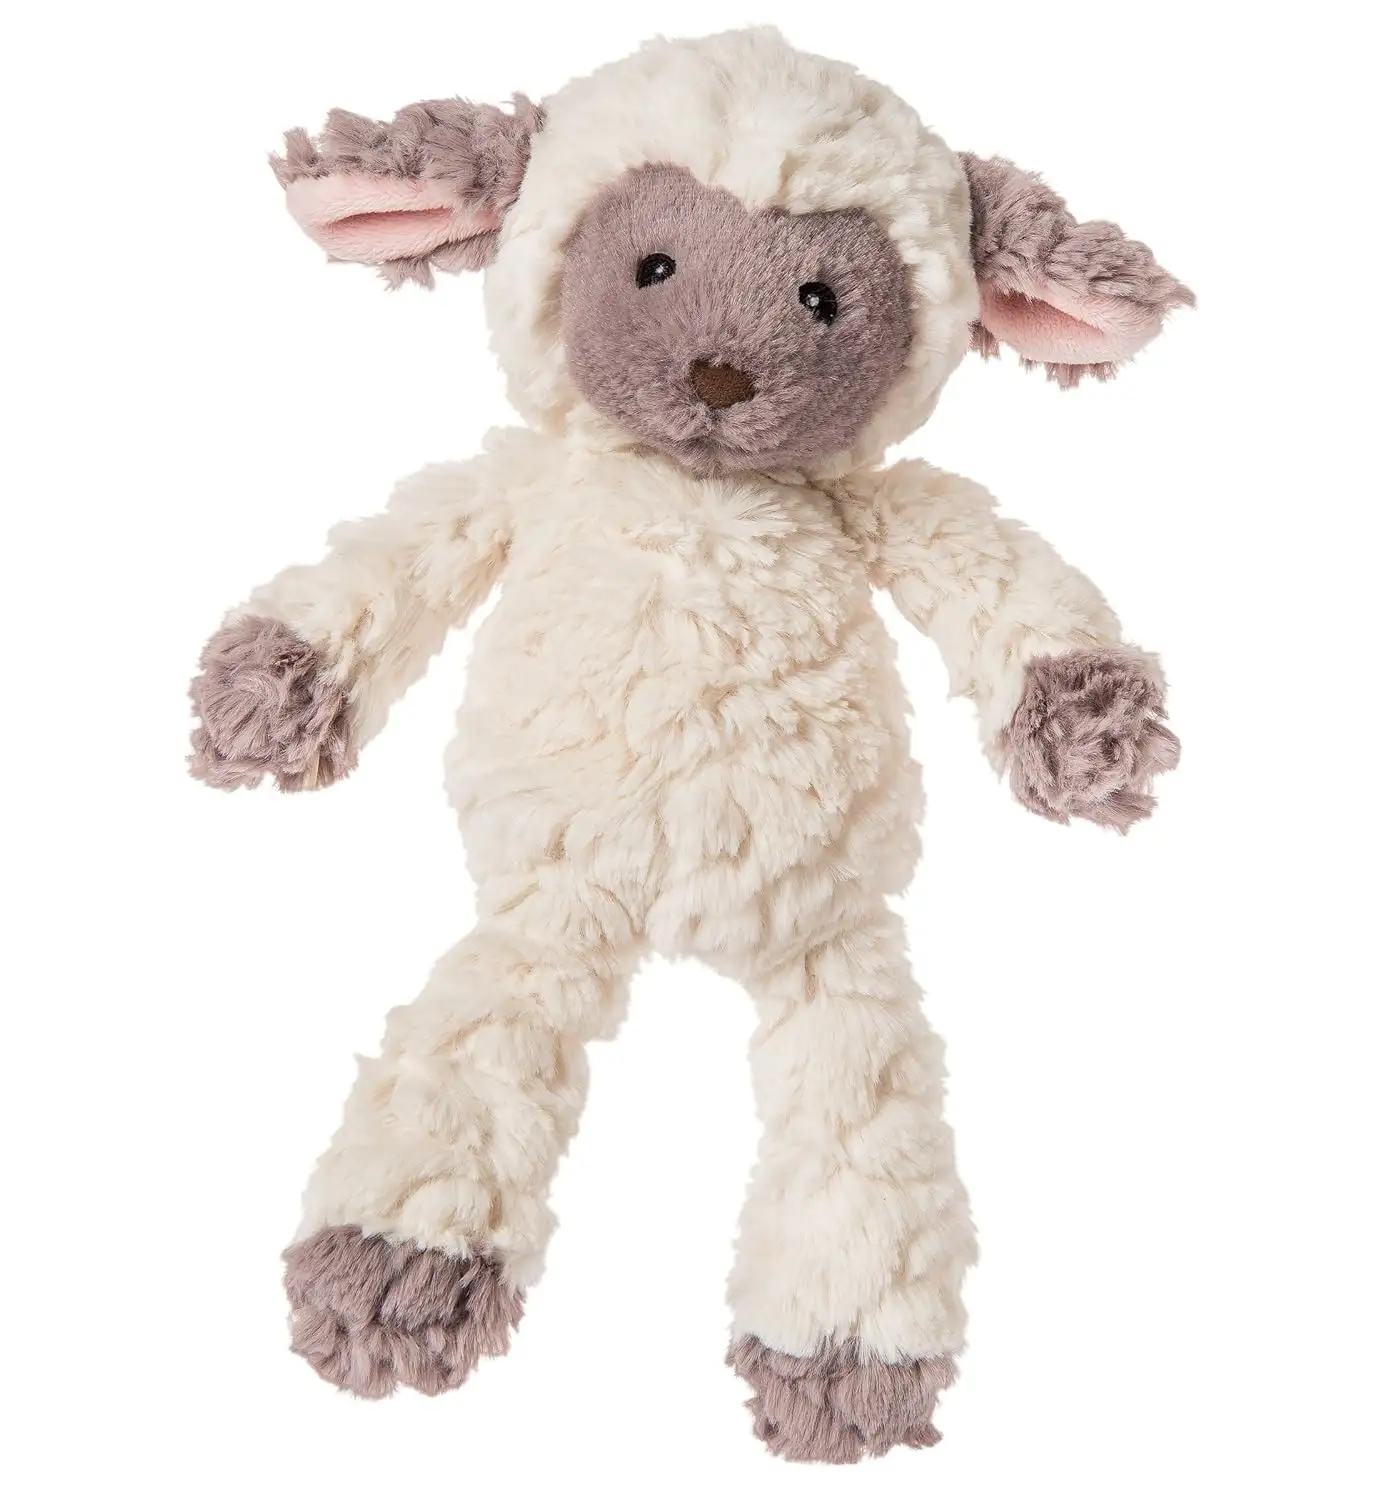 Mary Meyer Putty Nursery Soft Toy  Lamb   11 Inch  Pack of 1 